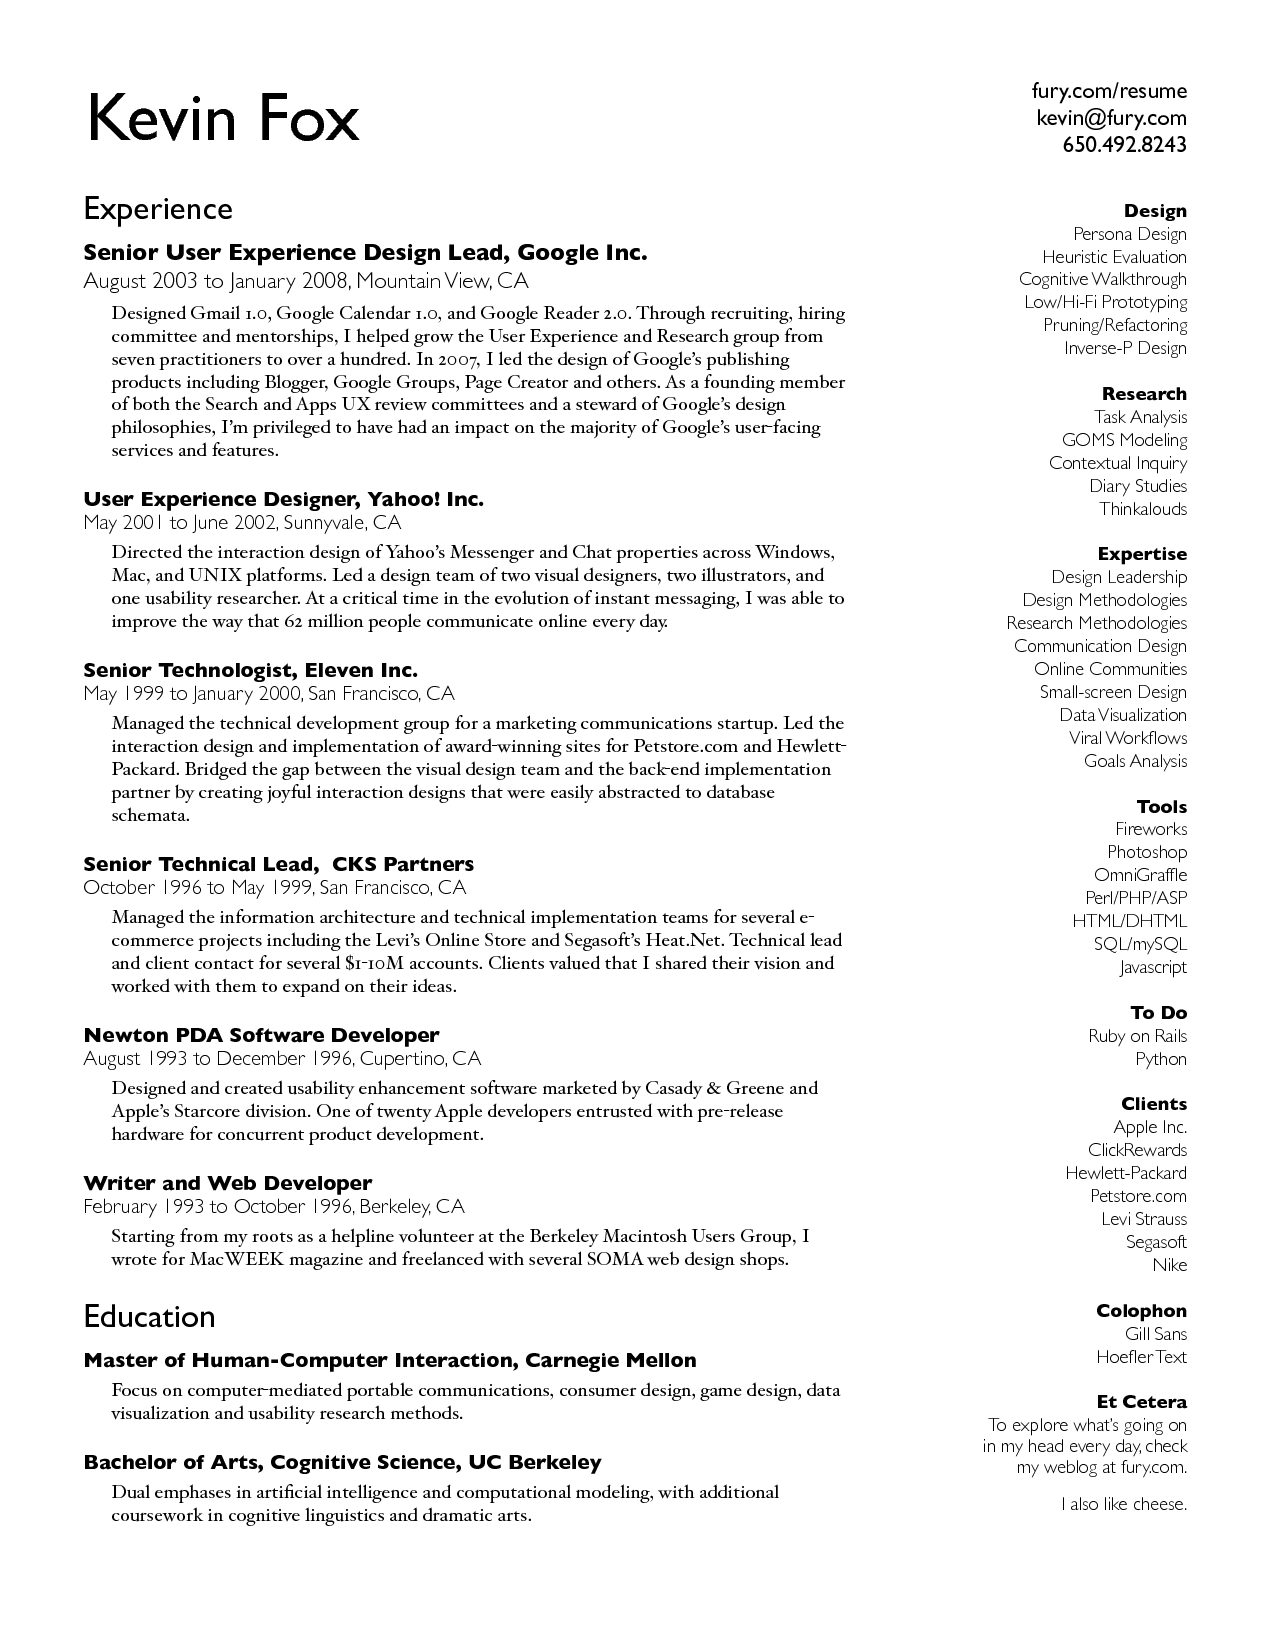 Google Resume Examples | Resume Example and Free Resume Maker